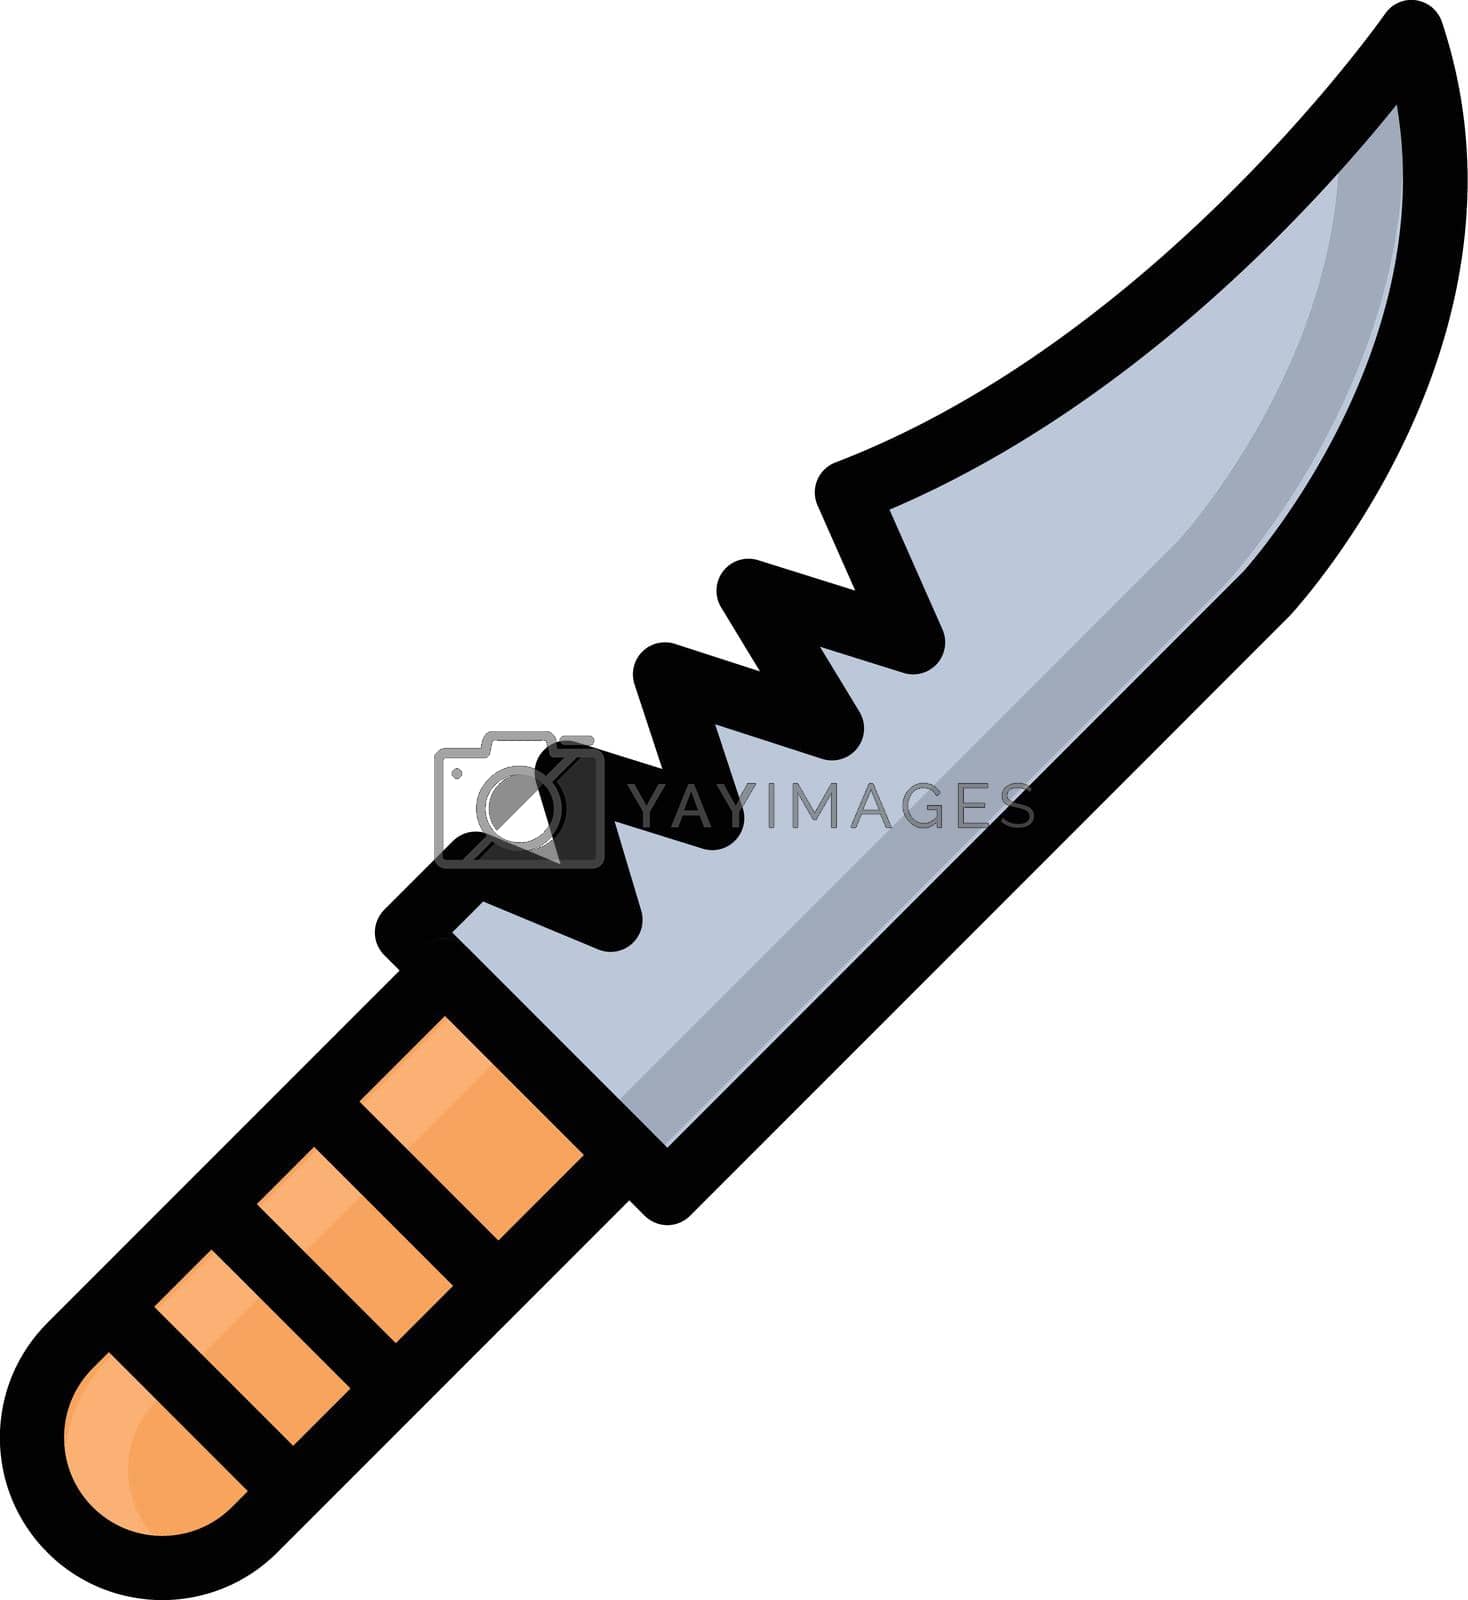 Royalty free image of knife by FlaticonsDesign